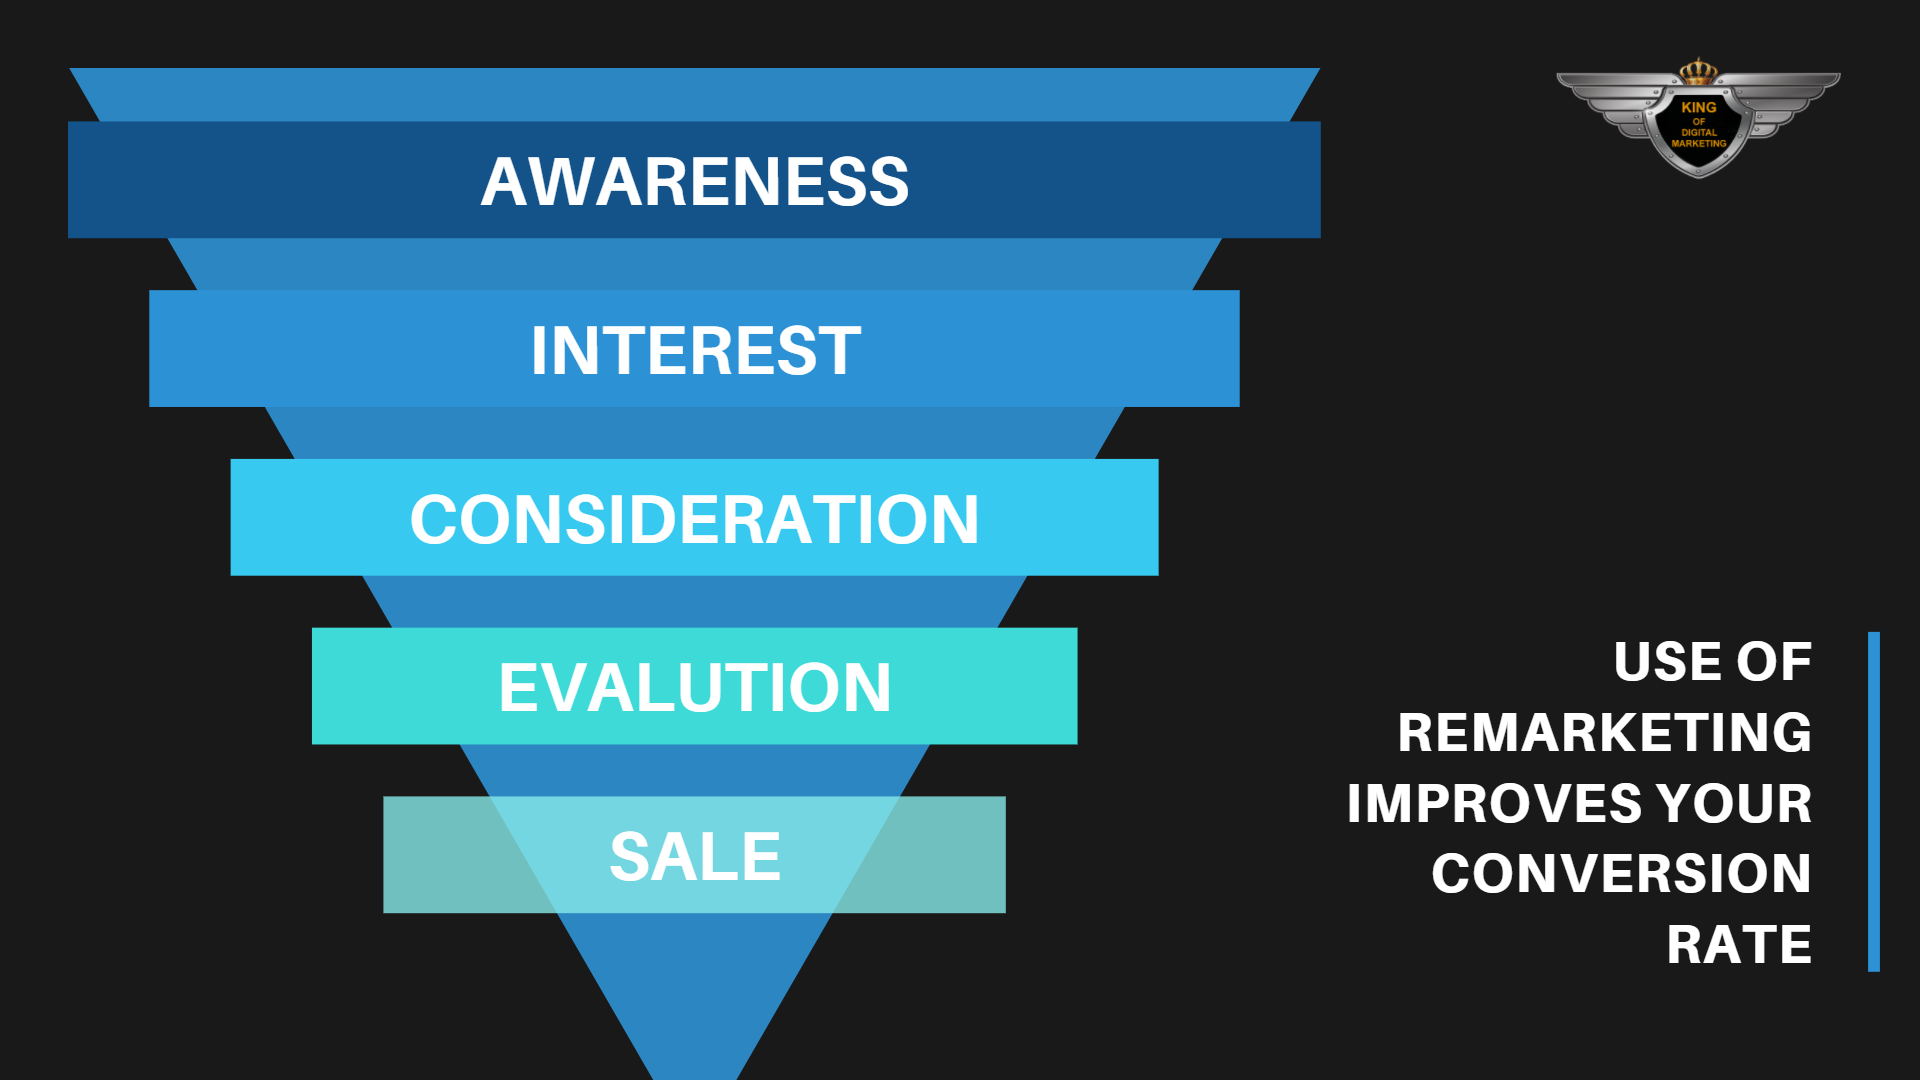 remarketing improves your conversion rate